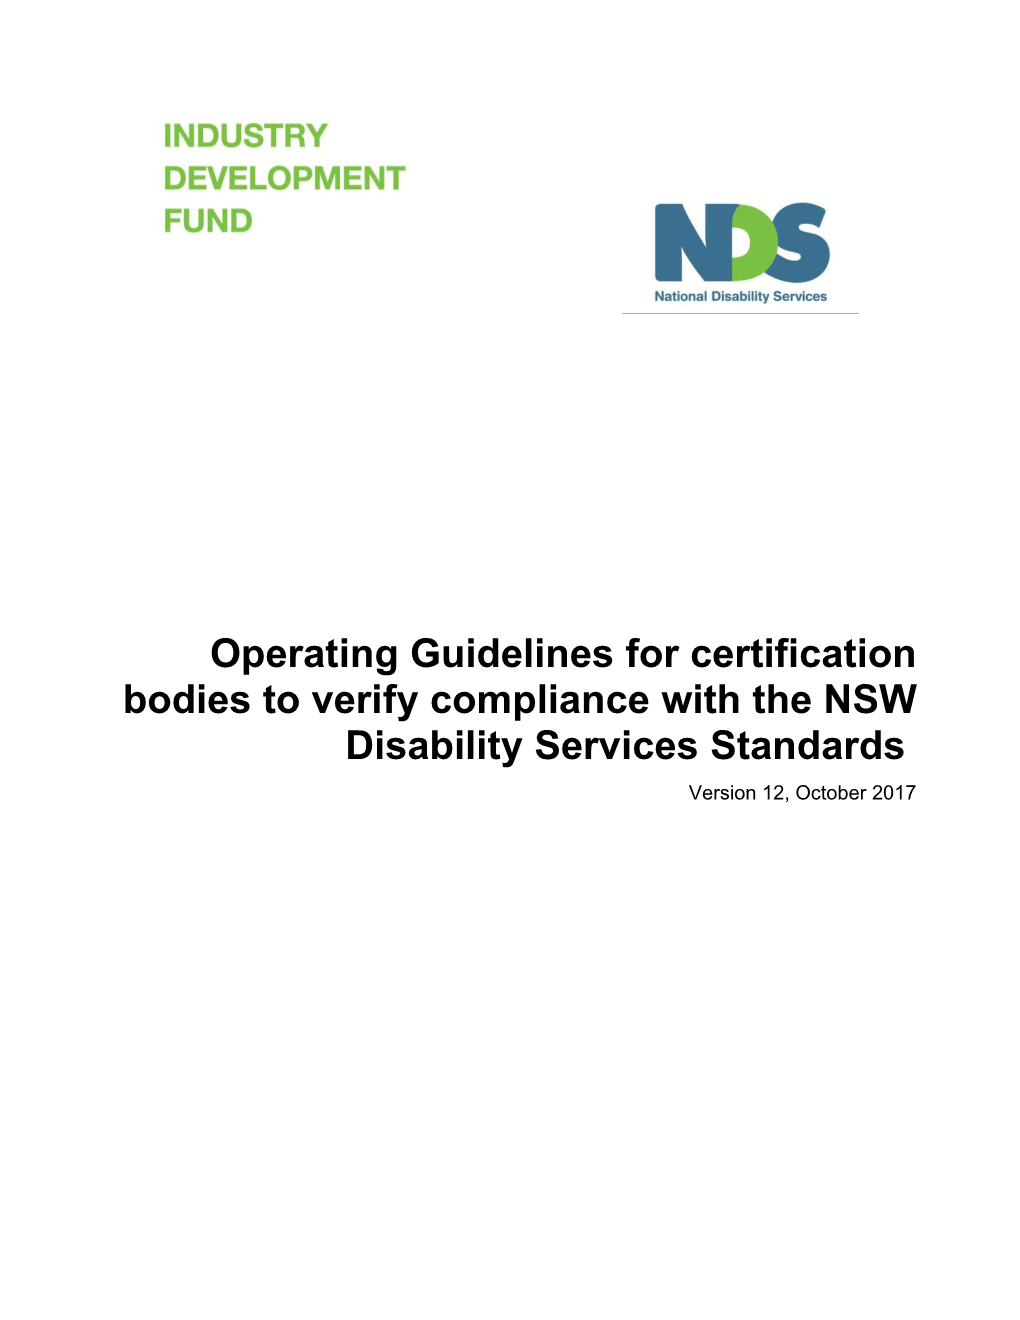 Business Rules for Organisations to Verify Compliance with the NSW Disability Services